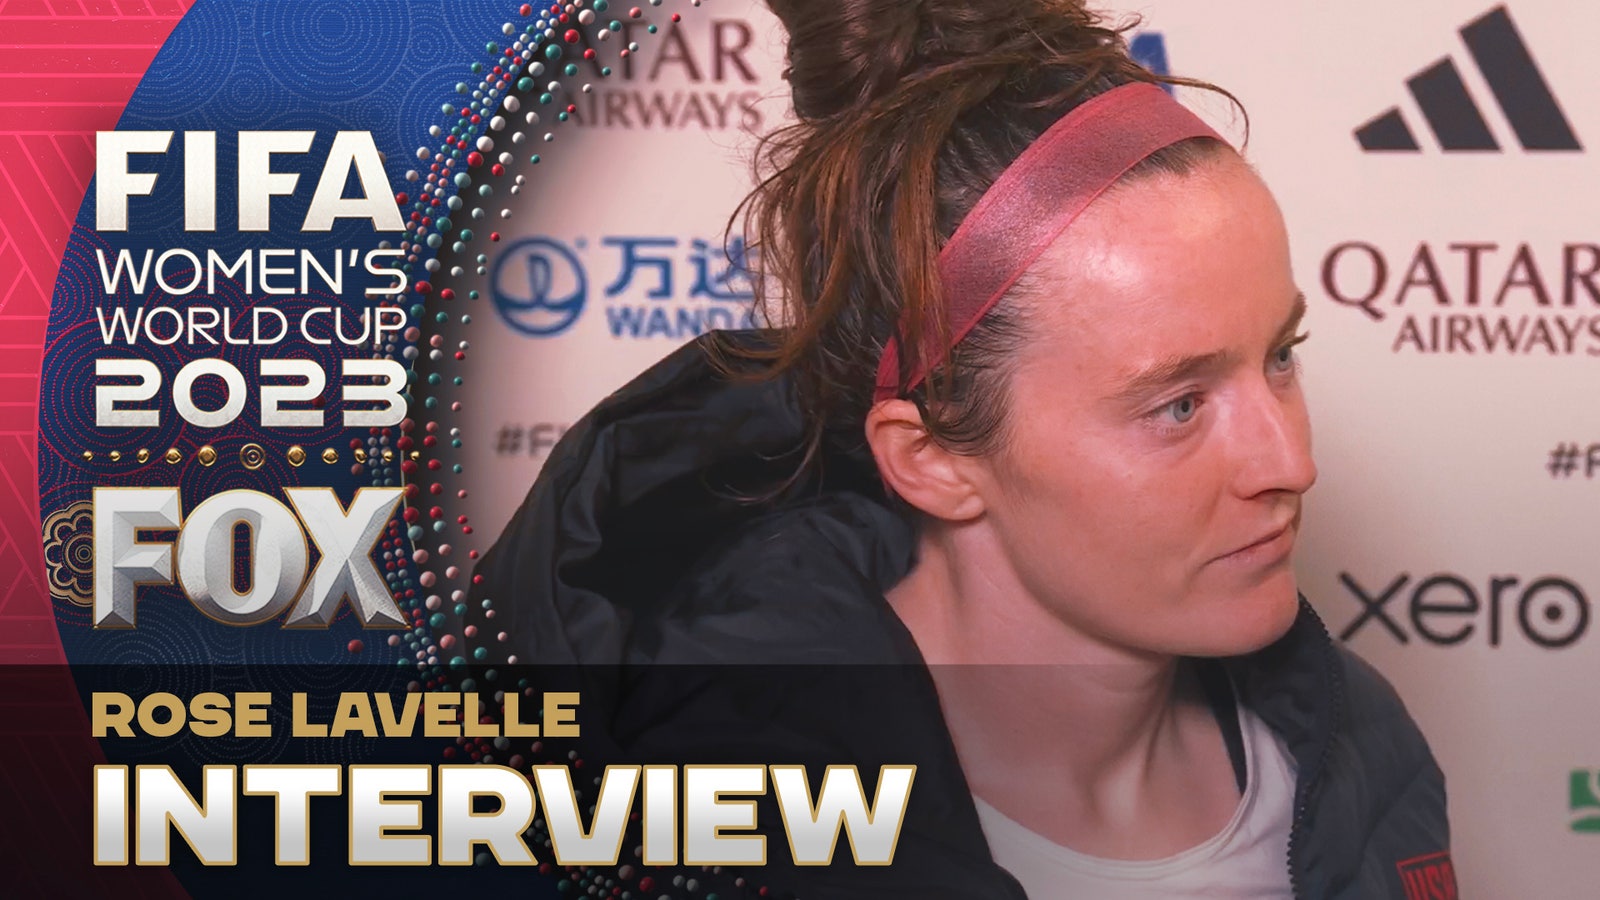 "We have another game to focus on" — Rose Lavelle